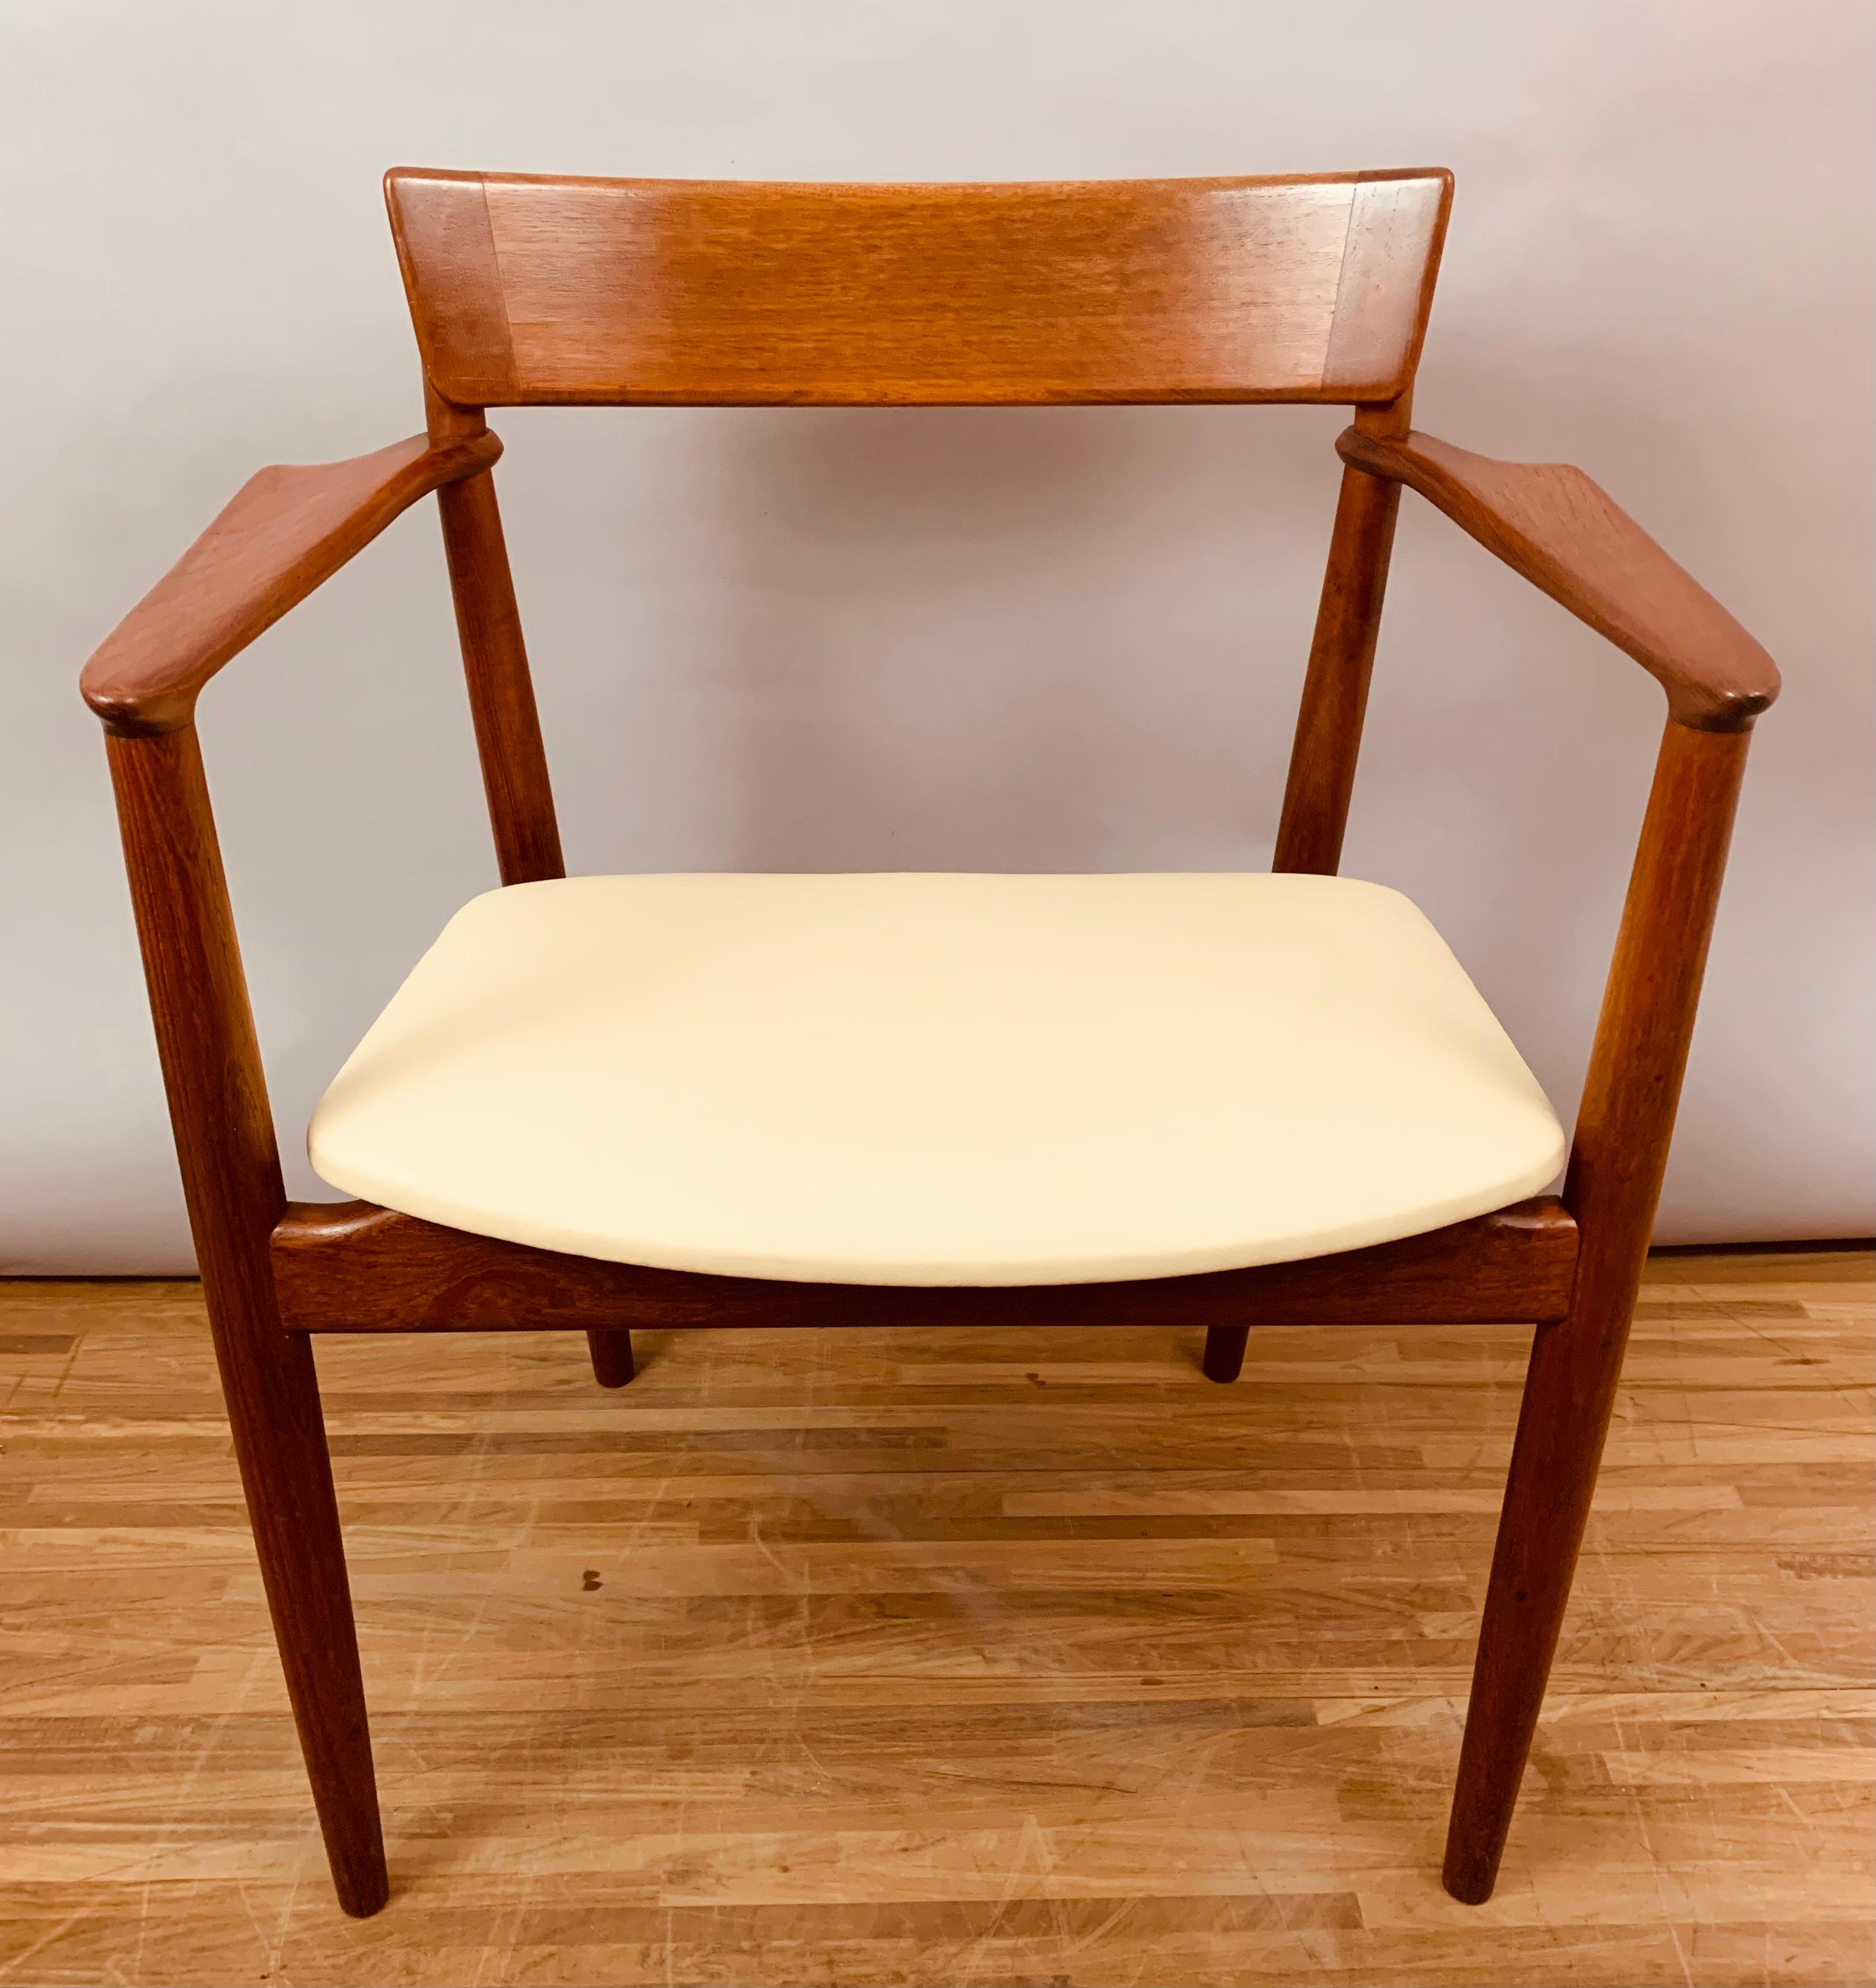 A very well-made and beautifully formed carver armchair with sculpted arms and backrest. Designed in Denmark by designer Henry Rosengren Hansen for Brande Mobelfabrik during the 1960s. Made from solid Teak and newly reupholstered in an off-white